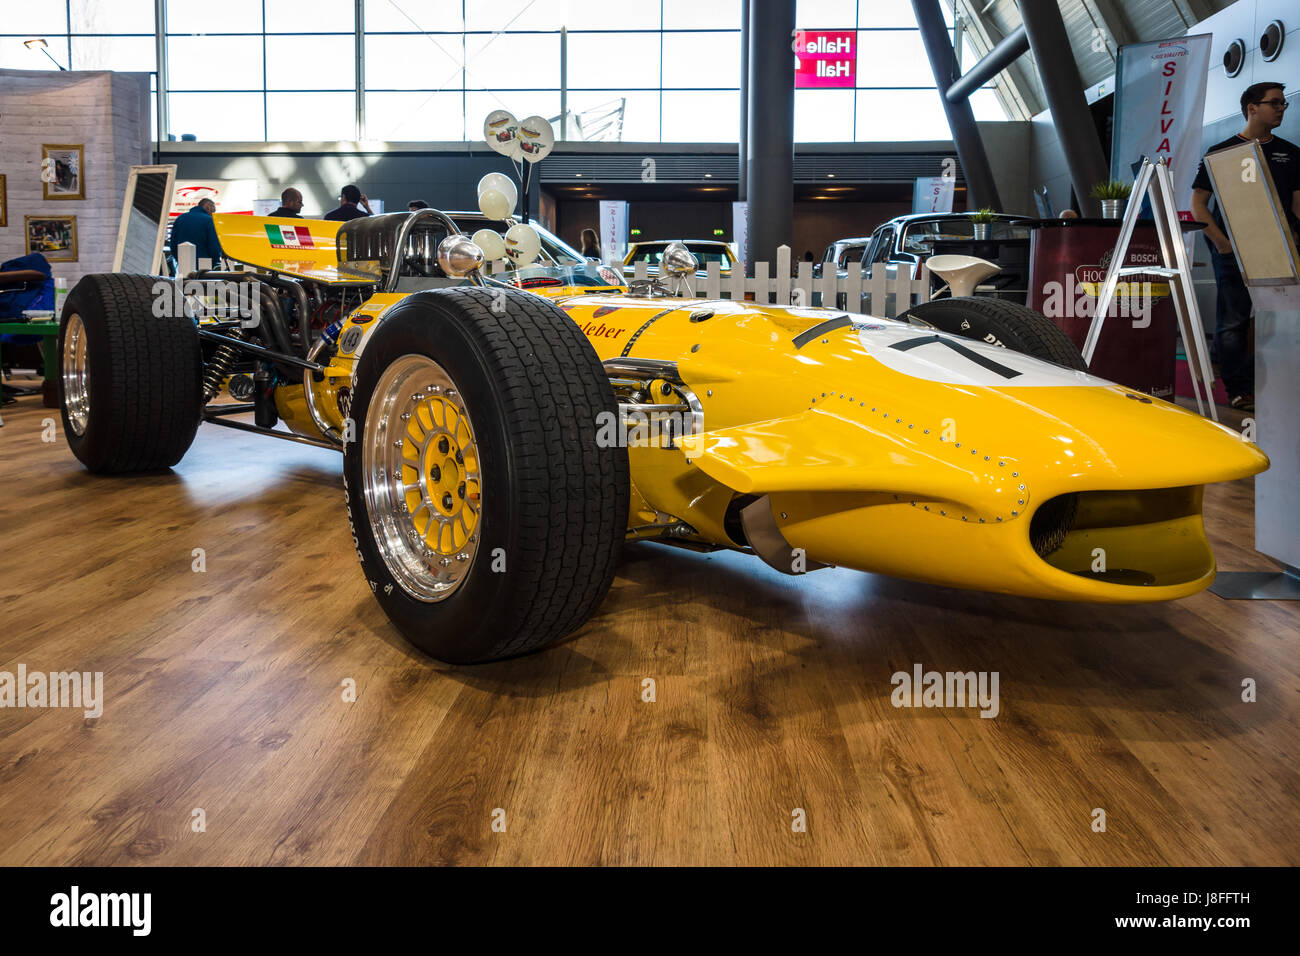 STUTTGART, GERMANY - MARCH 04, 2017: Race car Serenissima M1AF, 1967. Europe's greatest classic car exhibition 'RETRO CLASSICS' Stock Photo